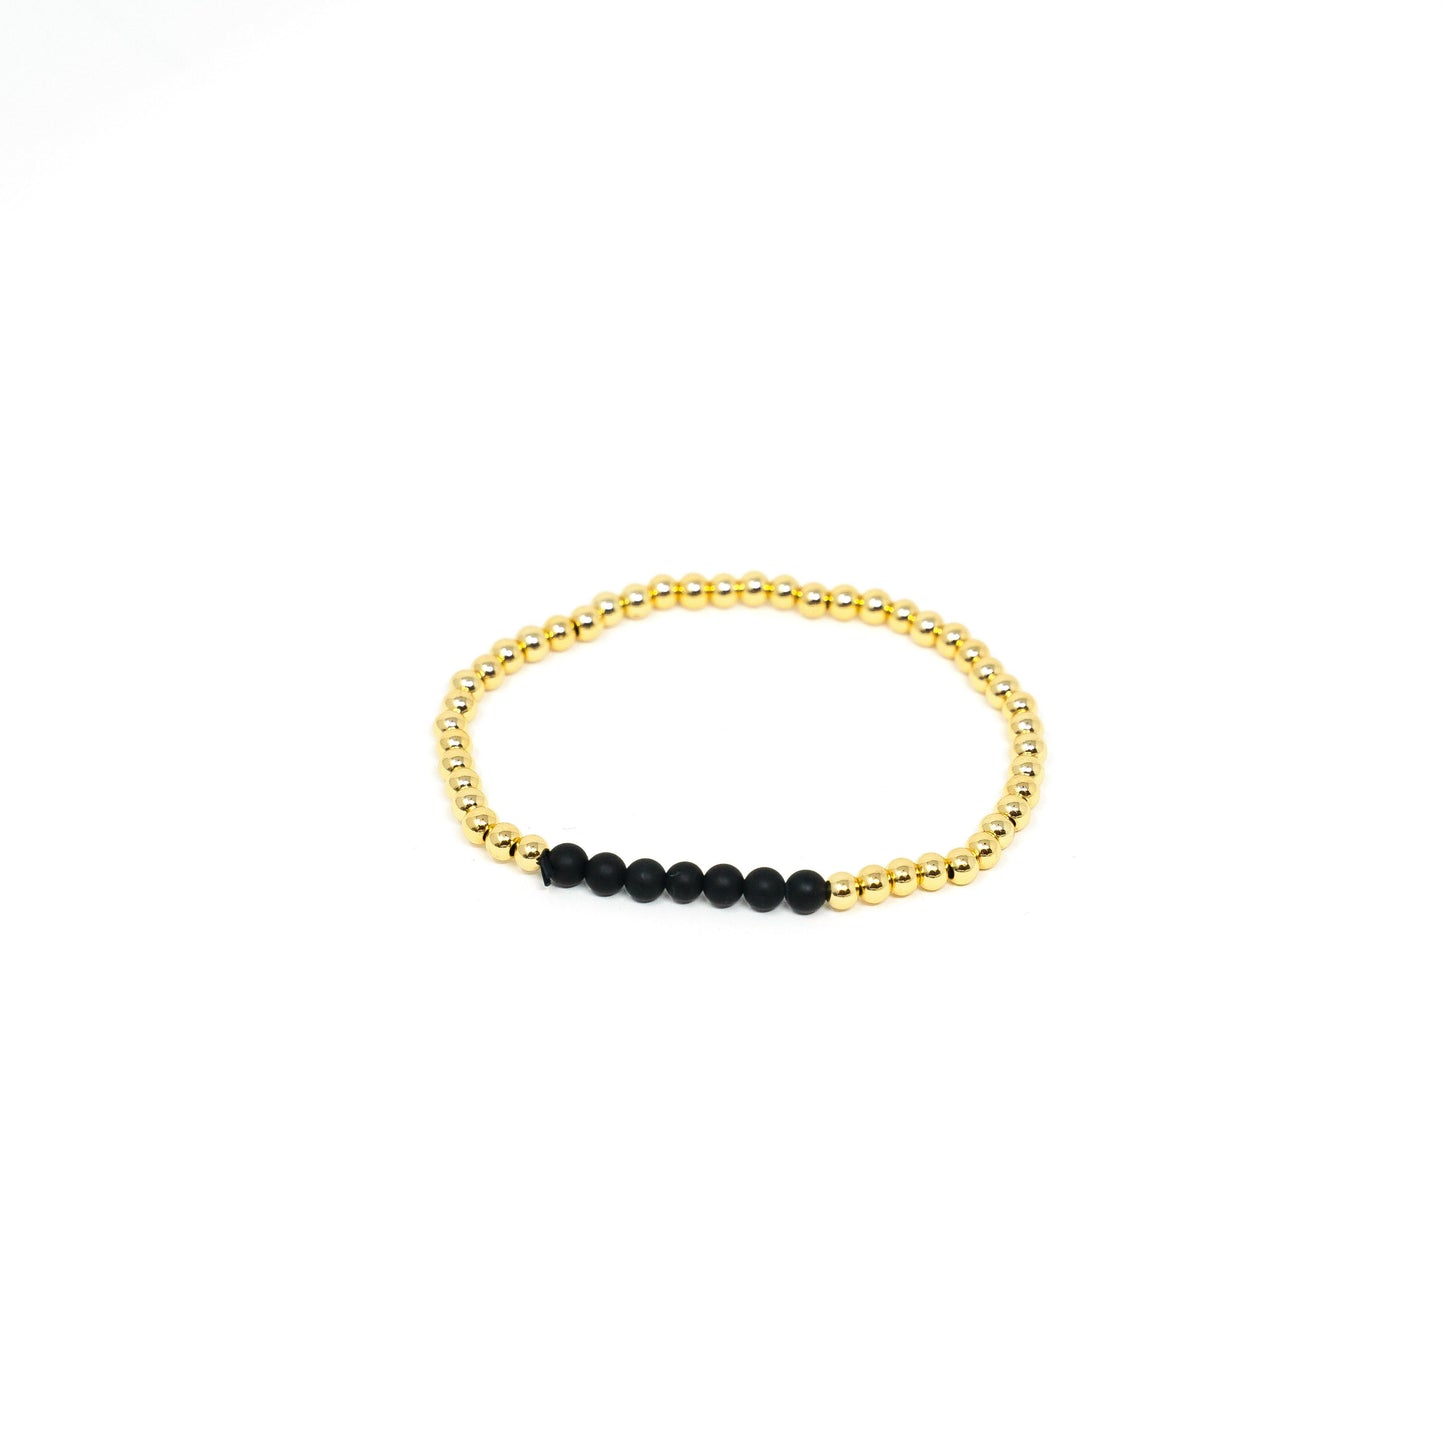 Pearl and Gold Bead Stretch Bracelet JEWELRY The Sis Kiss Gold With Black Accent